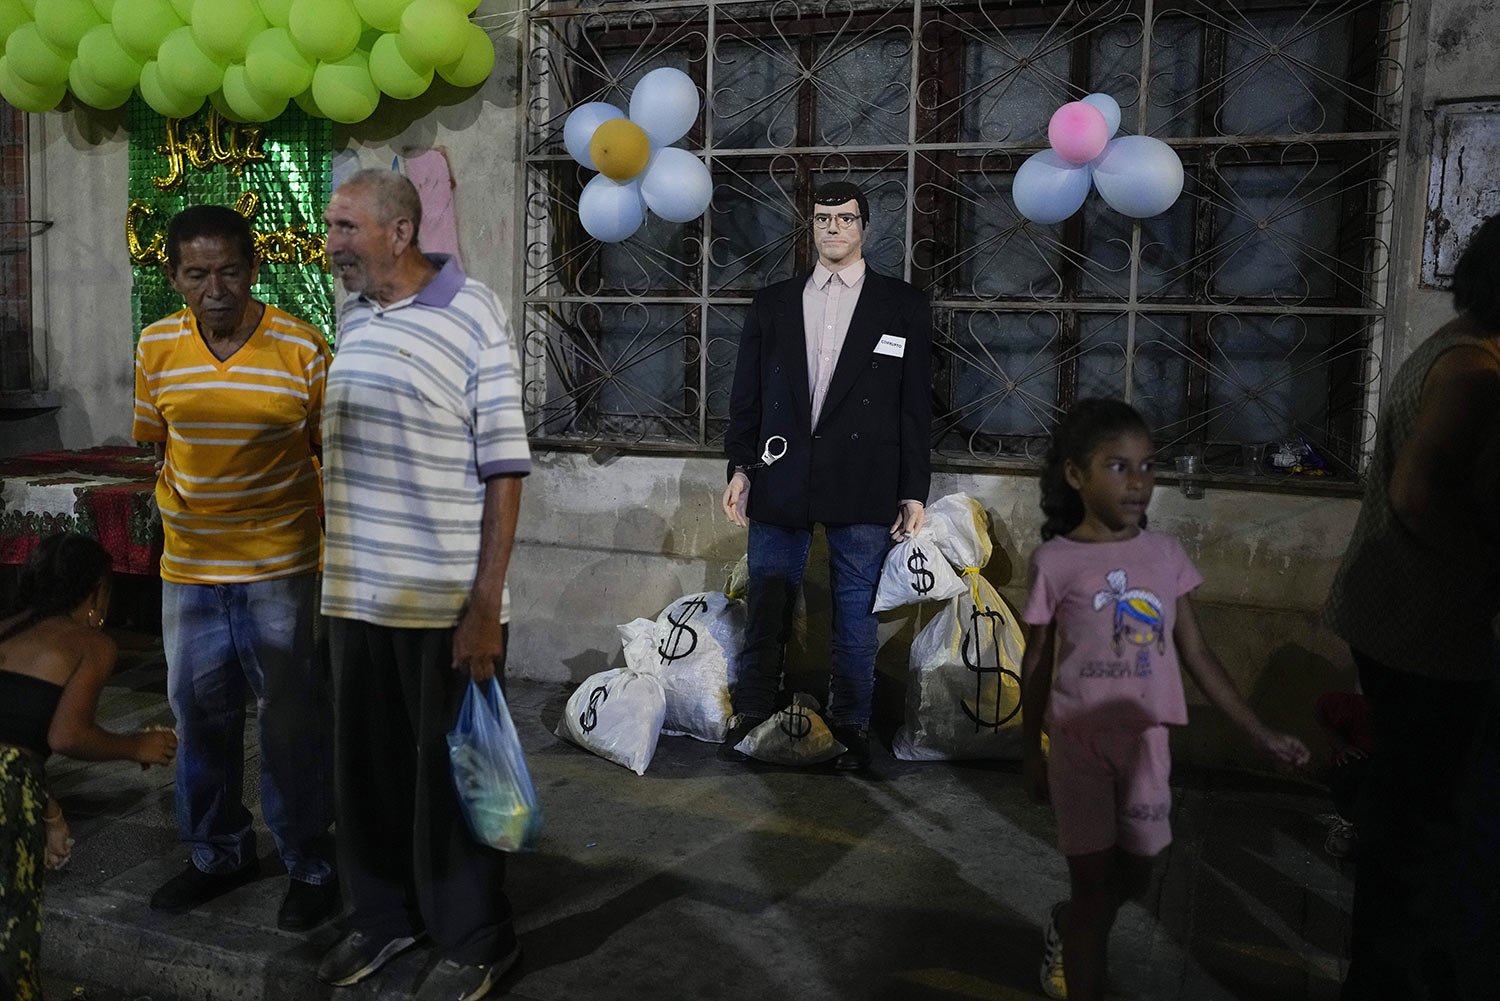  An effigy, labeled "corrupt one,” surrounded with props representing bags of money, is displayed on a sidewalk before it is ignited during the annual Burning of Judas celebrations in Caracas, Venezuela, April 9, 2023. Originally, the burning figures